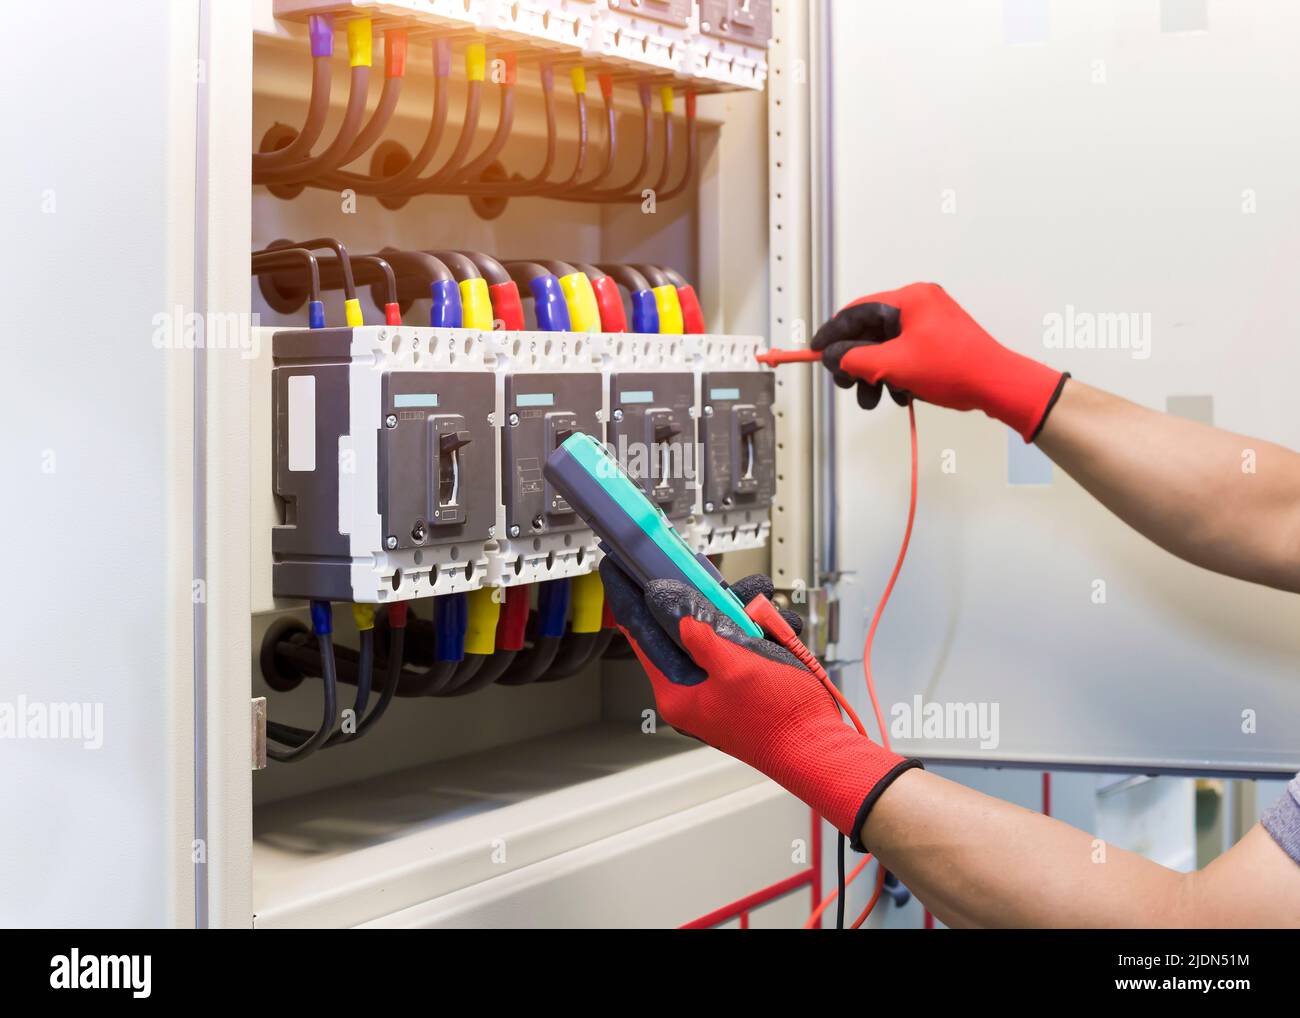 Electrical engineers check electrical control devices with a multimeter. Stock Photo